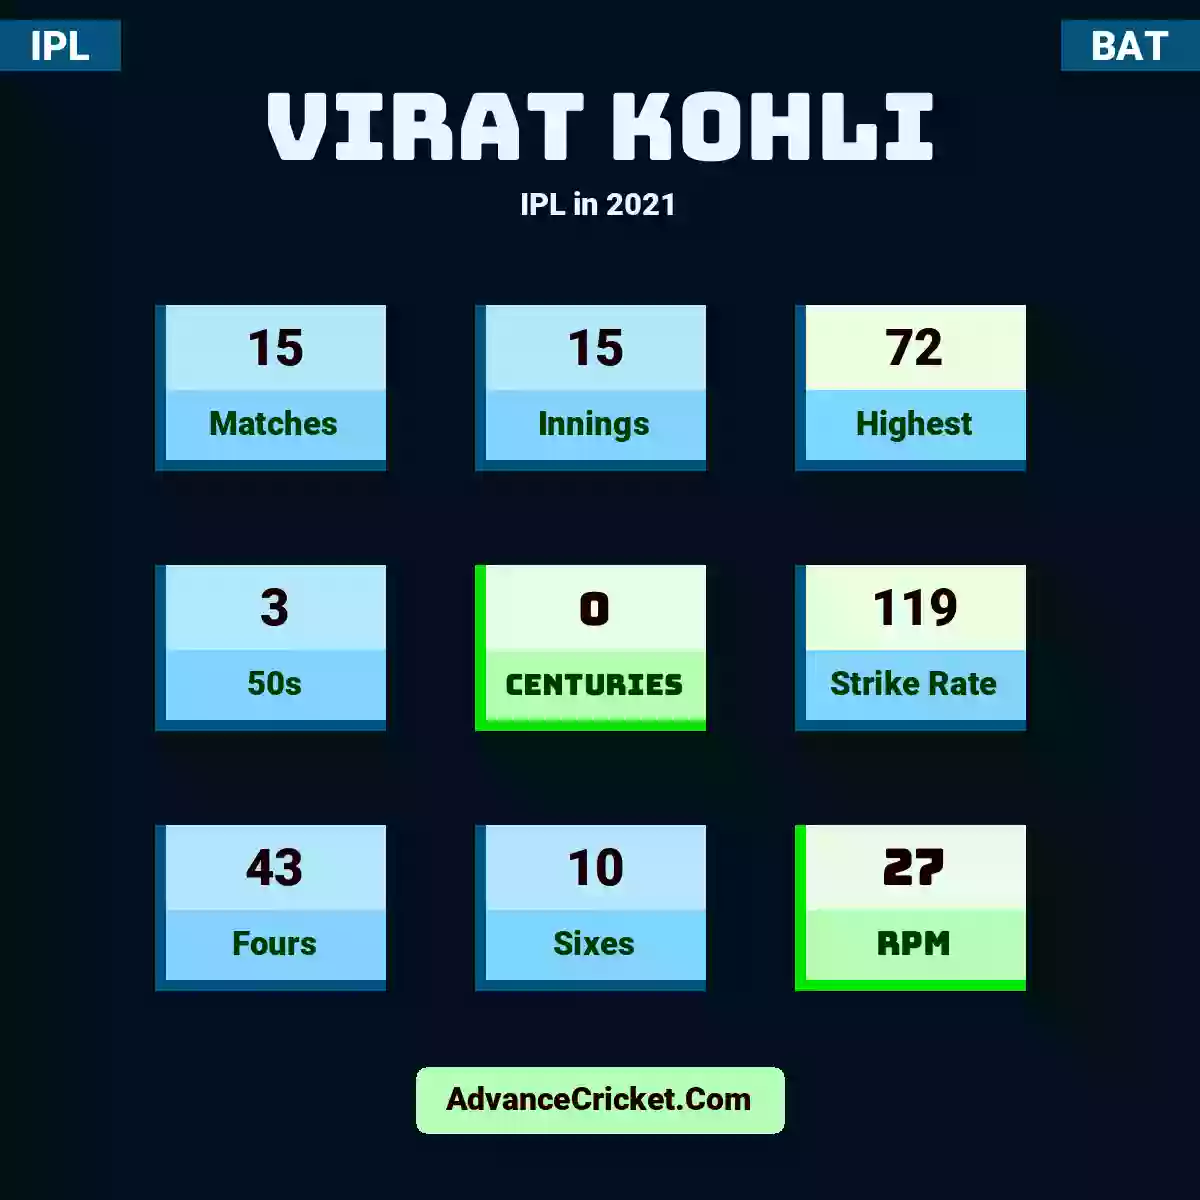 Virat Kohli IPL  in 2021, Virat Kohli played 15 matches, scored 72 runs as highest, 3 half-centuries, and 0 centuries, with a strike rate of 119. V.Kohli hit 43 fours and 10 sixes, with an RPM of 27.